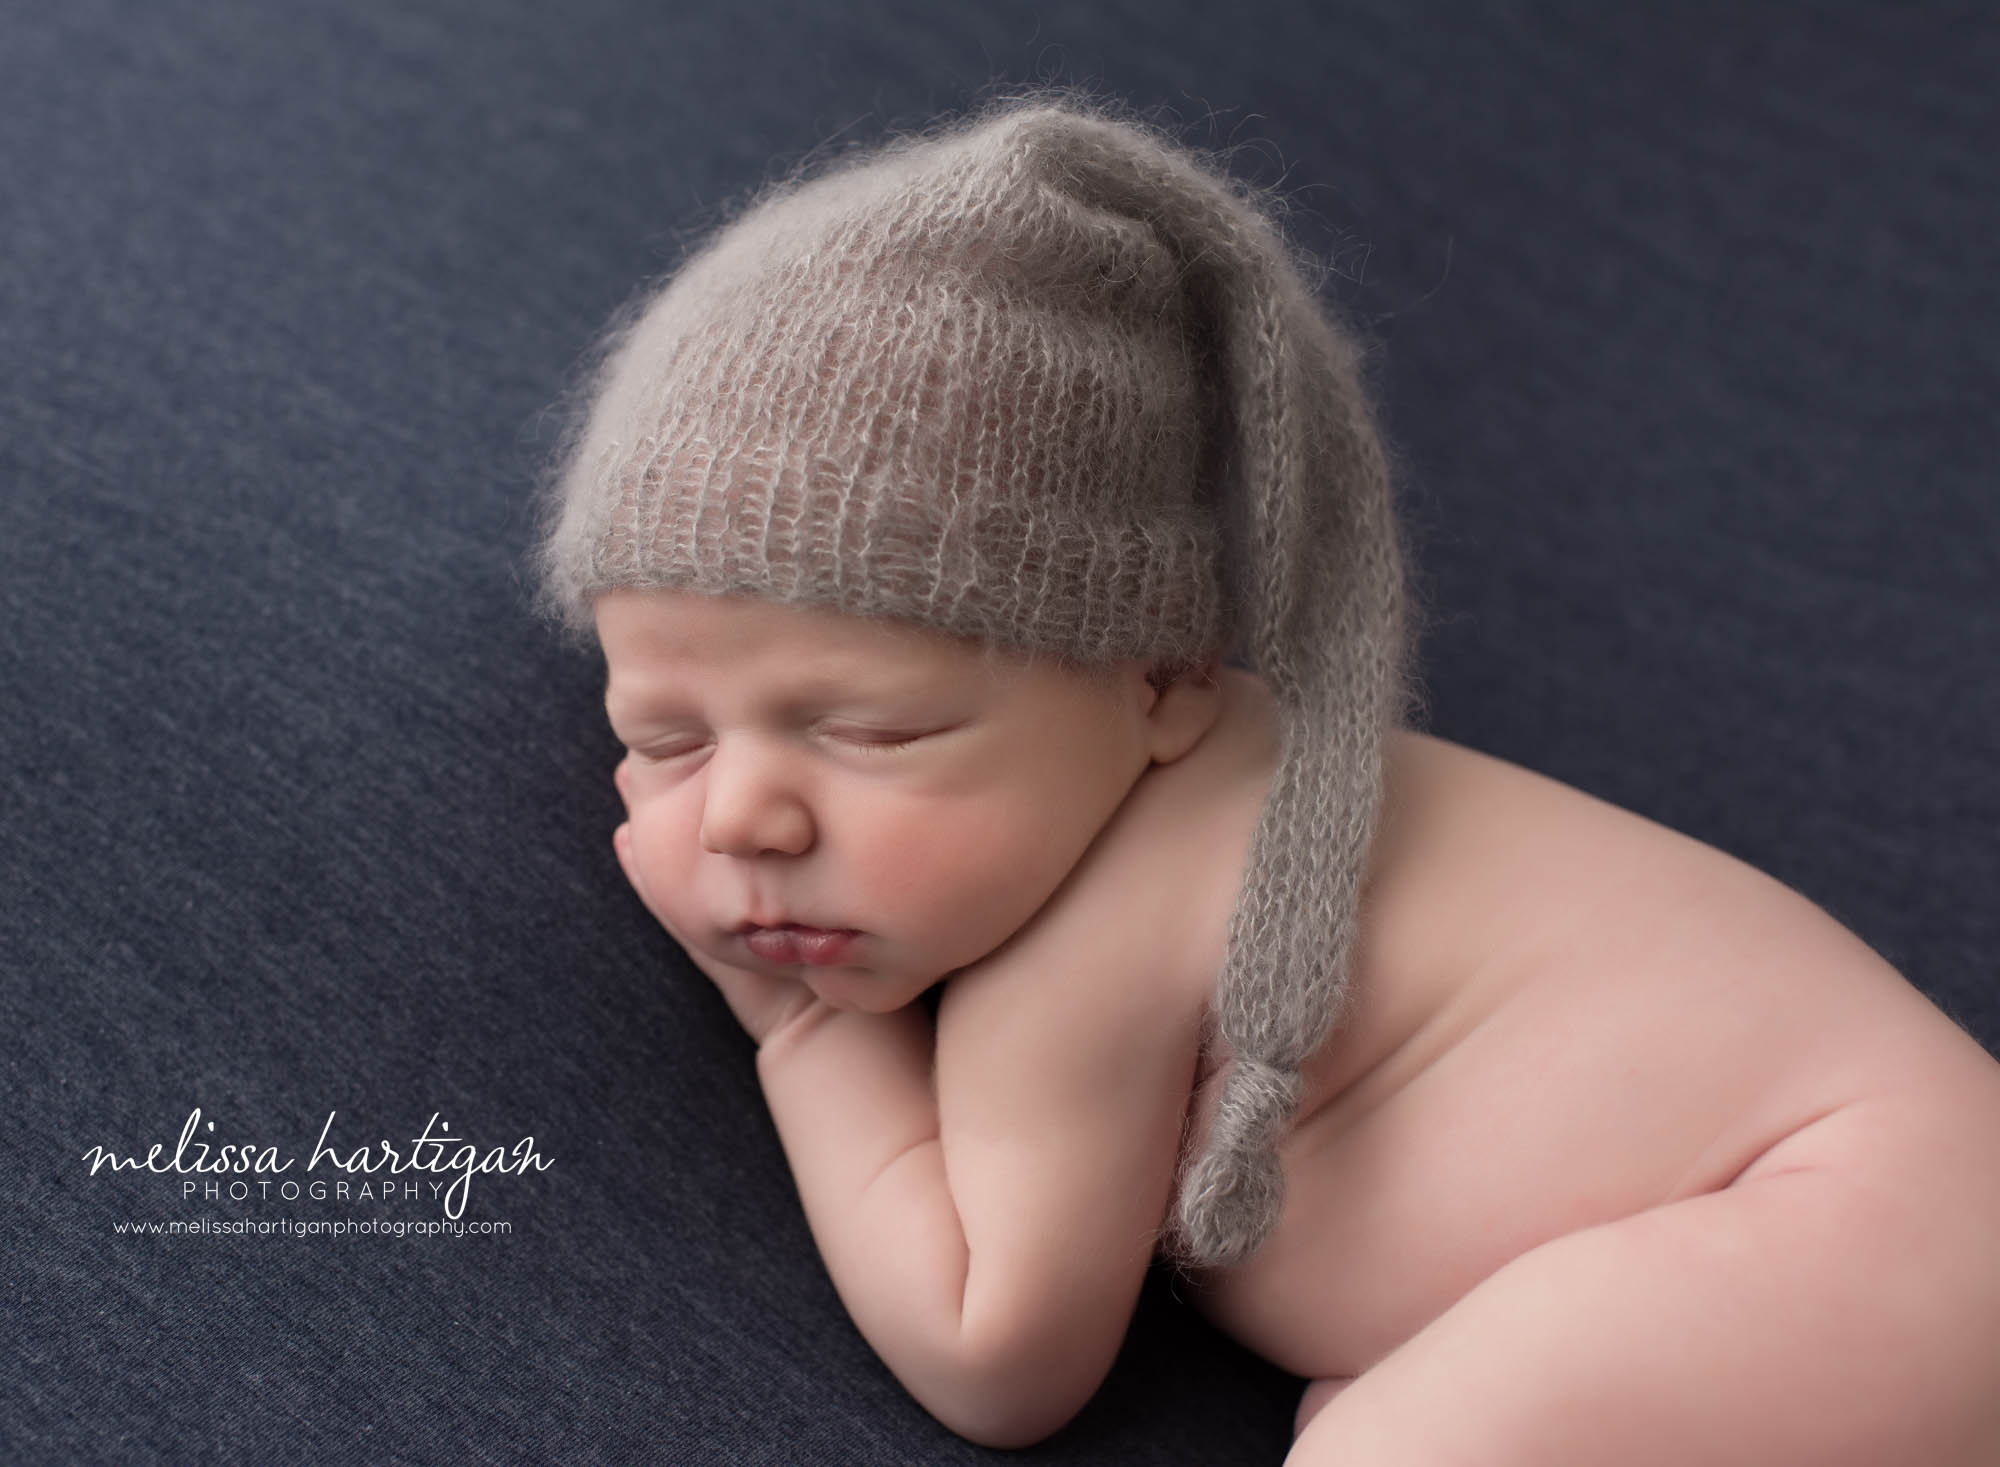 newborn baby boy posed on blue backdrop with gray knitted sleepy cap